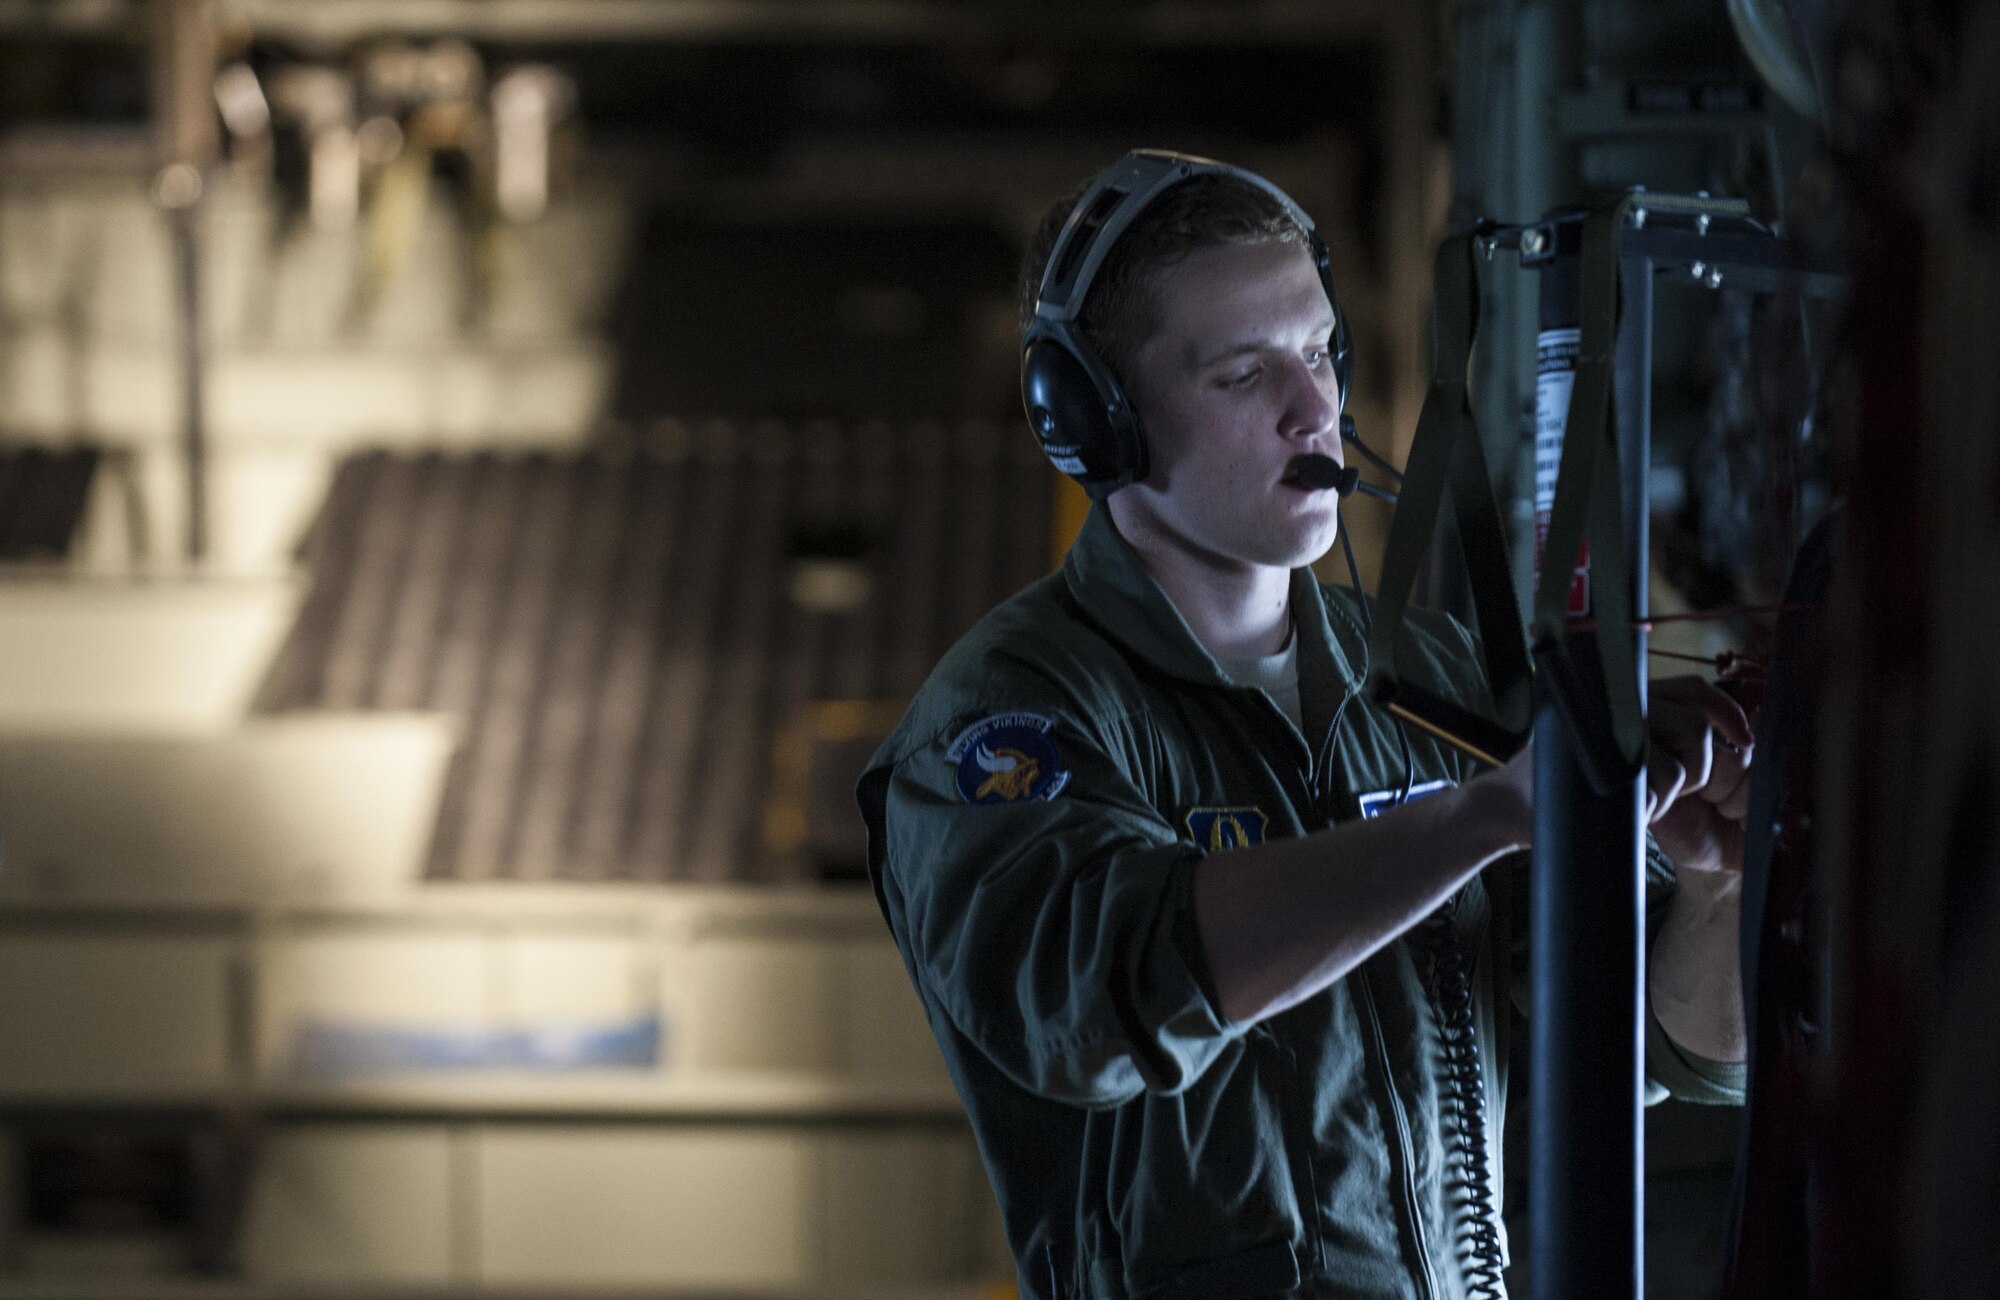 Senior Airman Alec Miller, a loadmaster with the 96th Airlift Squadron, secures a strap in a C-130H Hercules prior to releasing cargo during exercise Central Accord 2016 in Libreville, Gabon, June 18, 2016. The U.S. Army Africa exercise is an annual, combined, joint military exercise that brings together partner nations to practice and demonstrate proficiency in conducting peacekeeping operations. (DOD photo/Tech. Sgt. Brian Kimball)